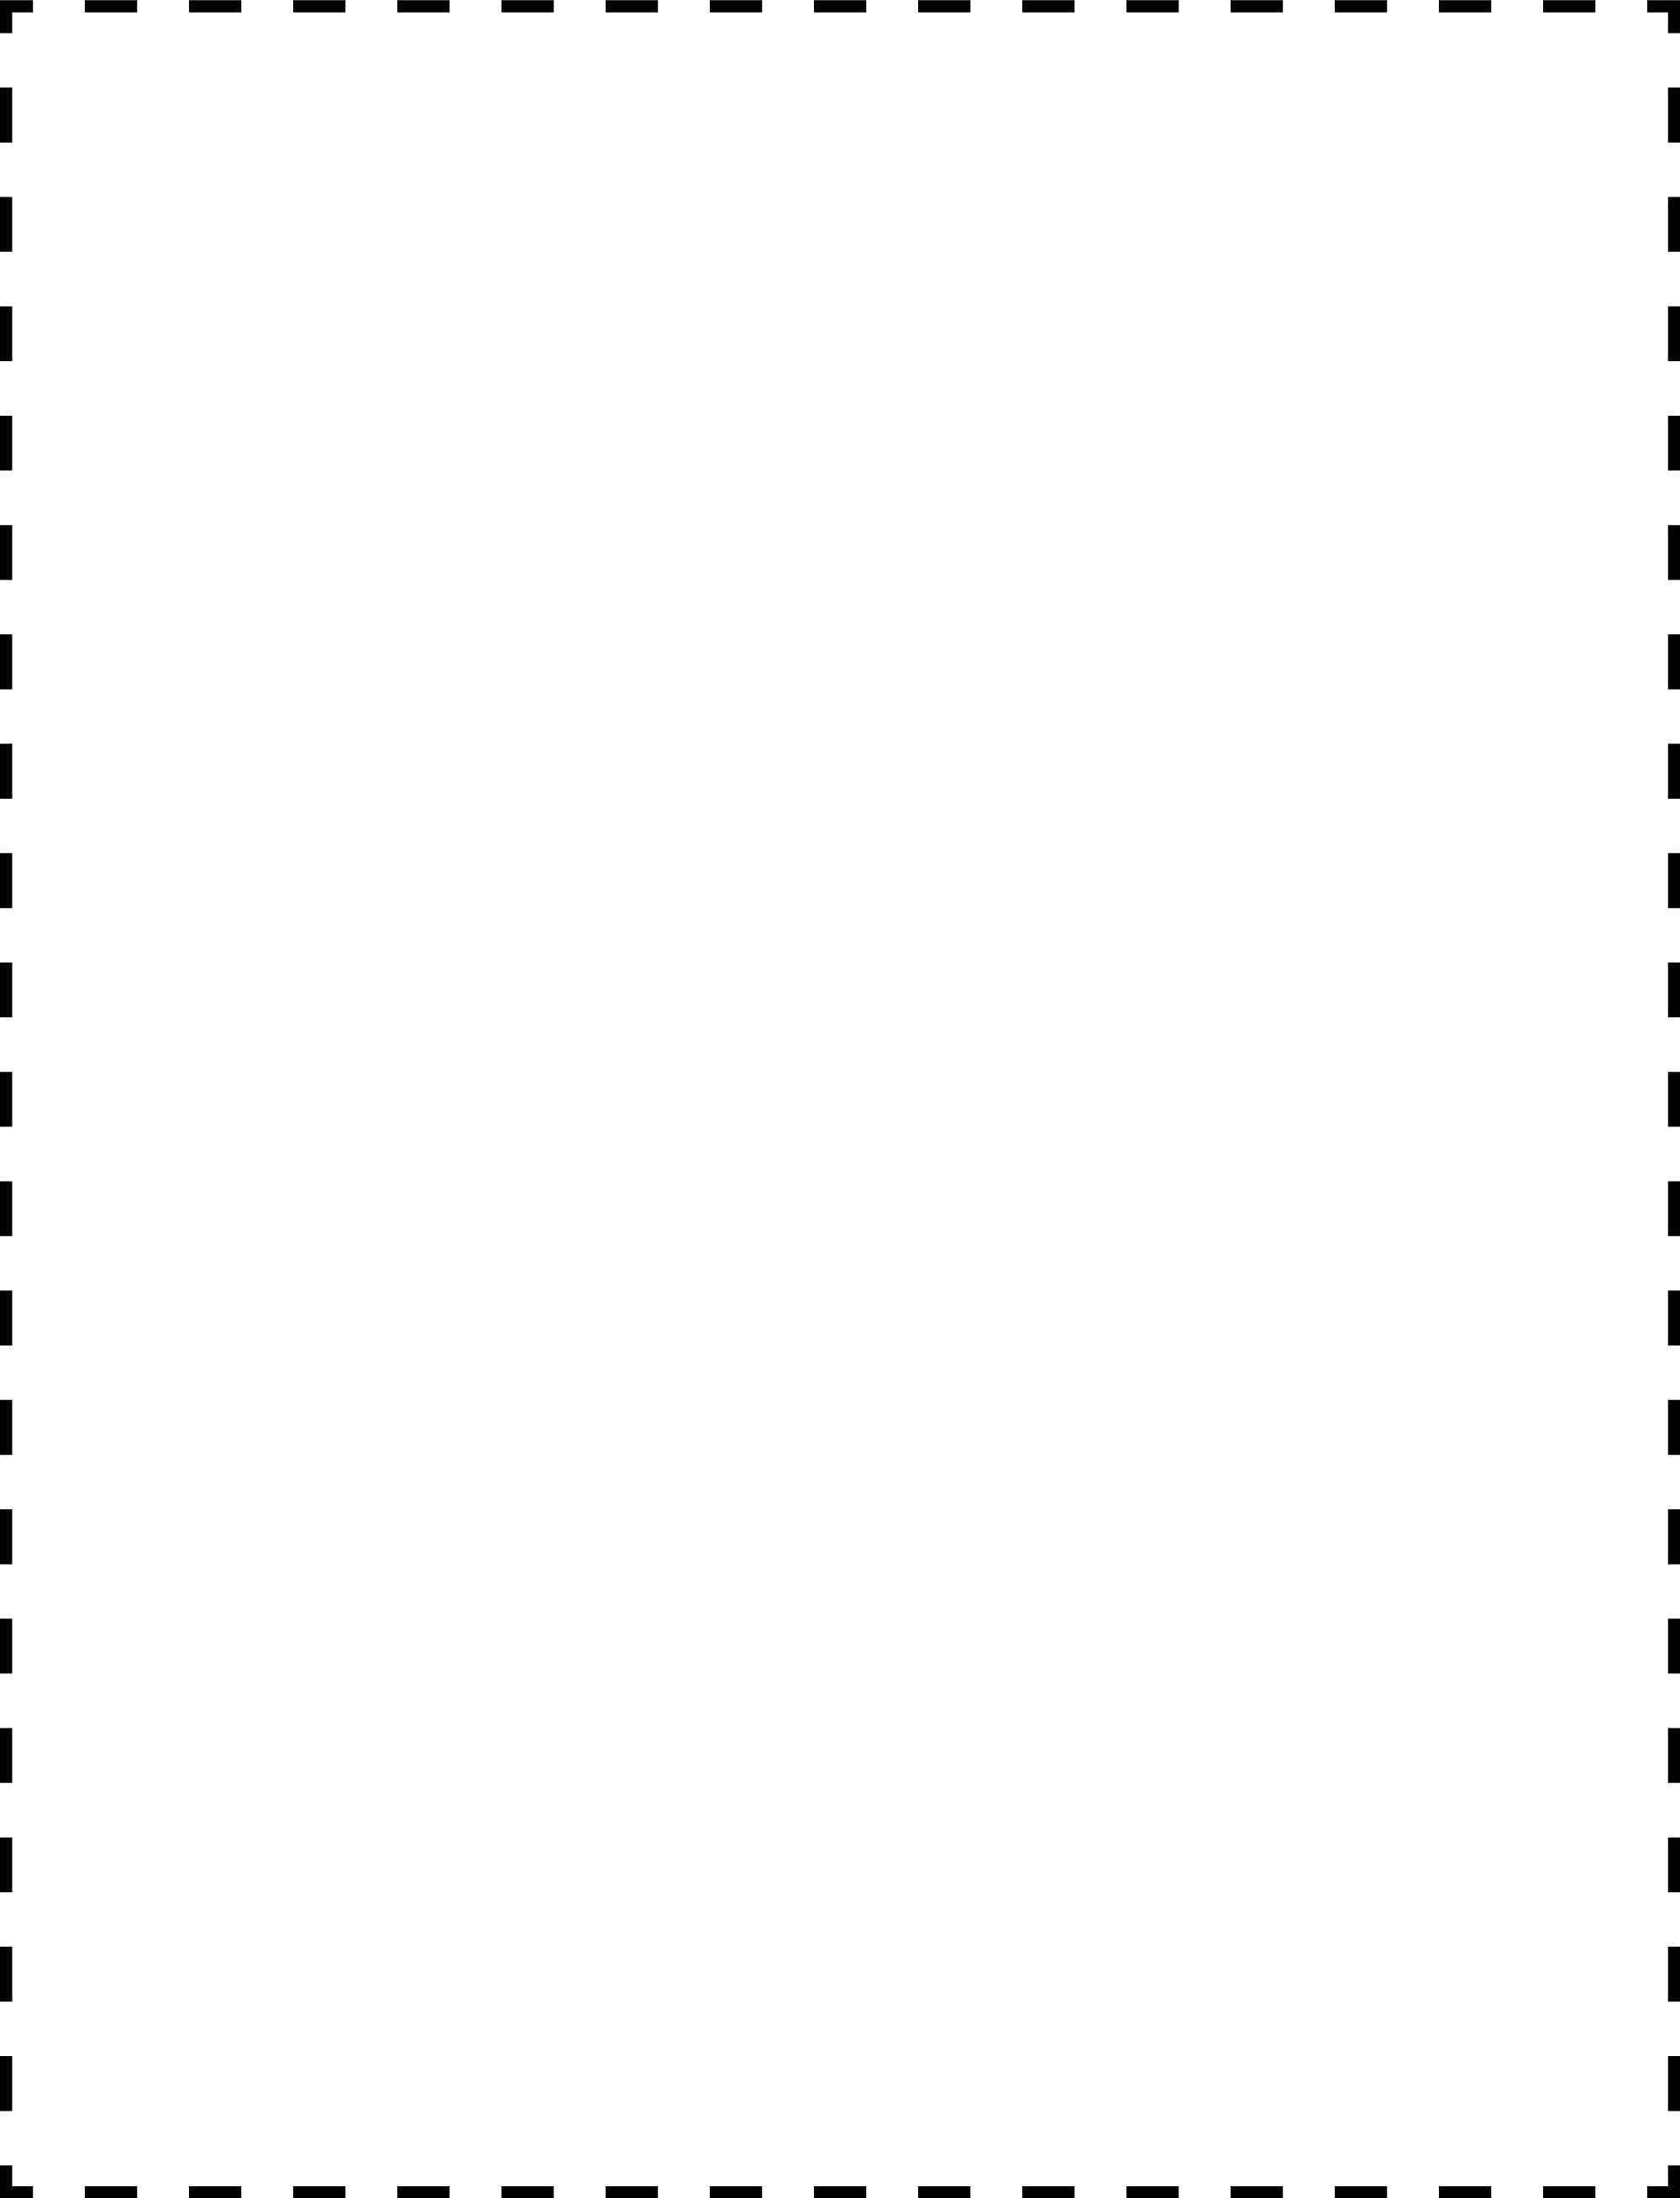 524-coupon-outline-4x5-k.png